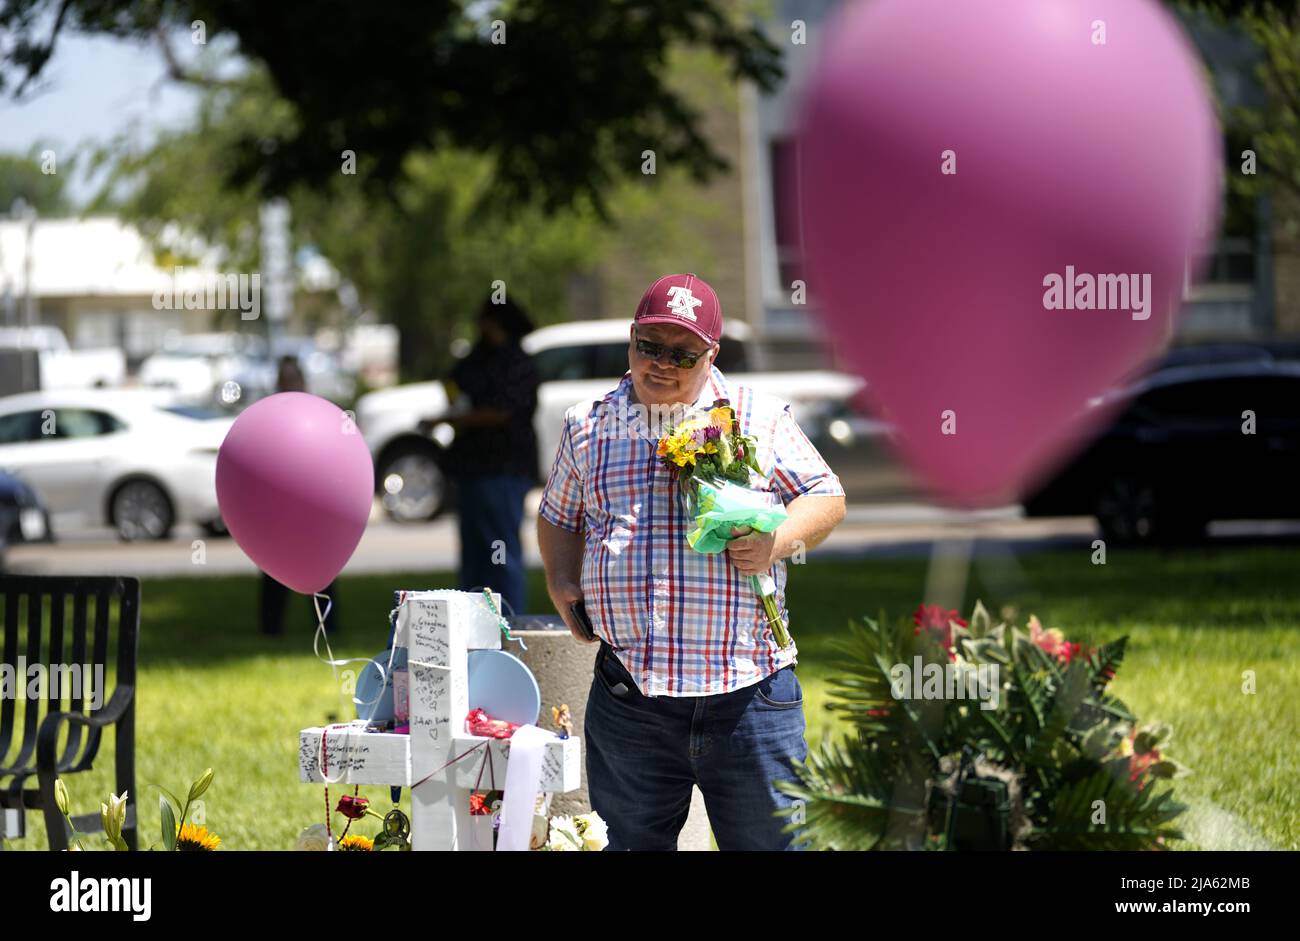 Uvalde, USA. 27th May, 2022. A man mourns for victims of a school mass shooting at Town Square in Uvalde, Texas, the United States, May 27, 2022. At least 19 children and two adults were killed in a shooting at Robb Elementary School in the town of Uvalde, Texas, on Tuesday. Credit: Wu Xiaoling/Xinhua/Alamy Live News Stock Photo